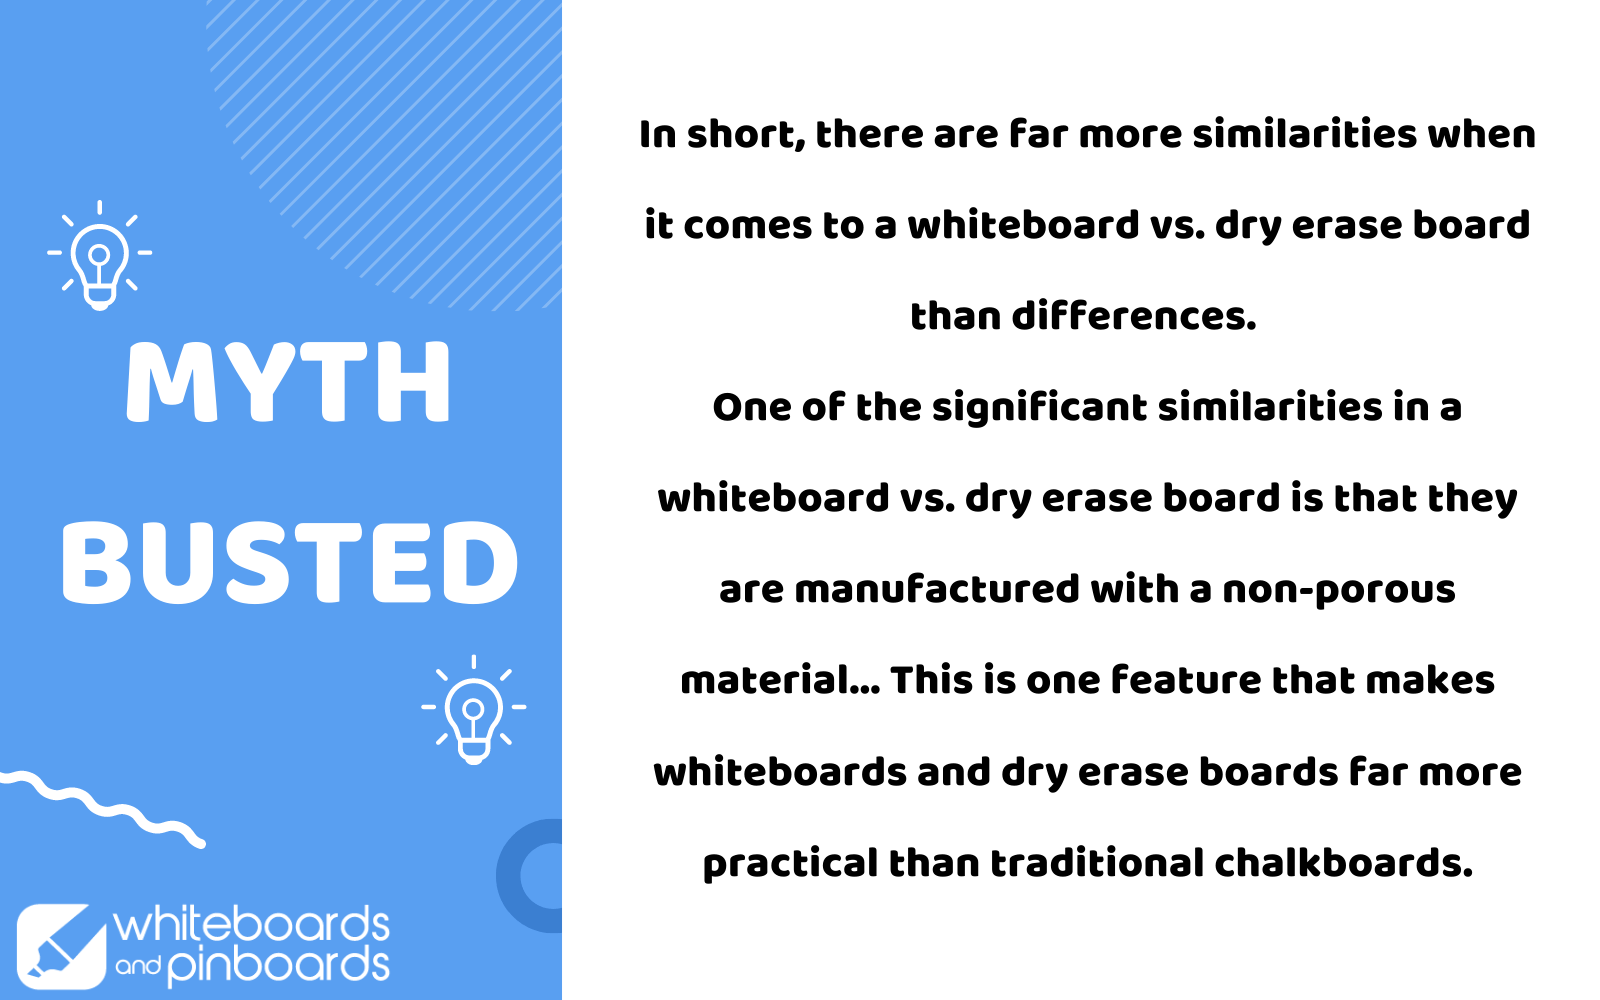 Whiteboard vs. Dry Erase Board - Which is Right for You?